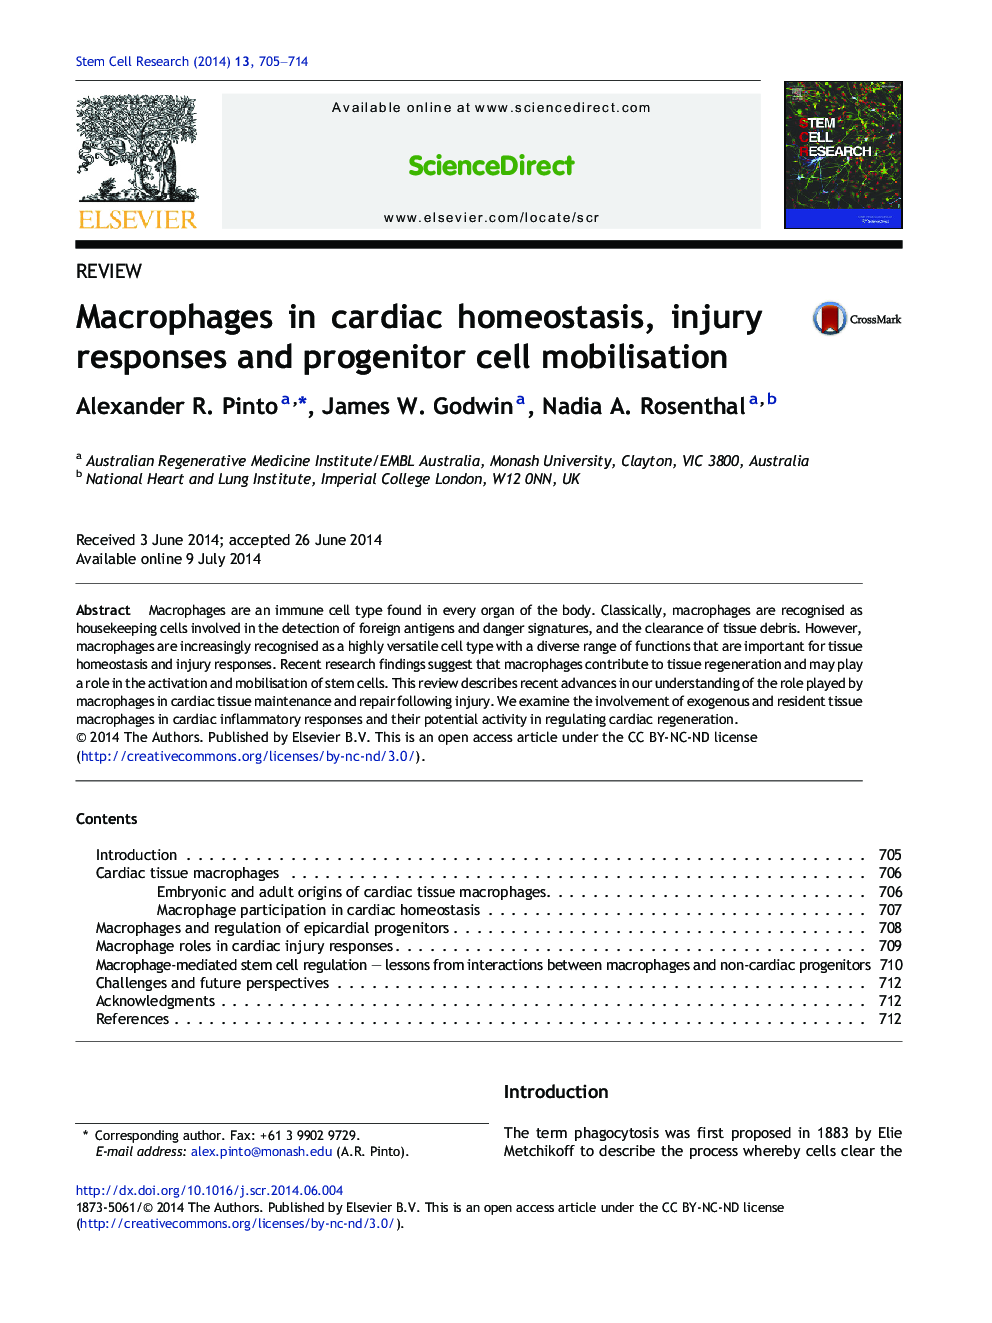 Macrophages in cardiac homeostasis, injury responses and progenitor cell mobilisation